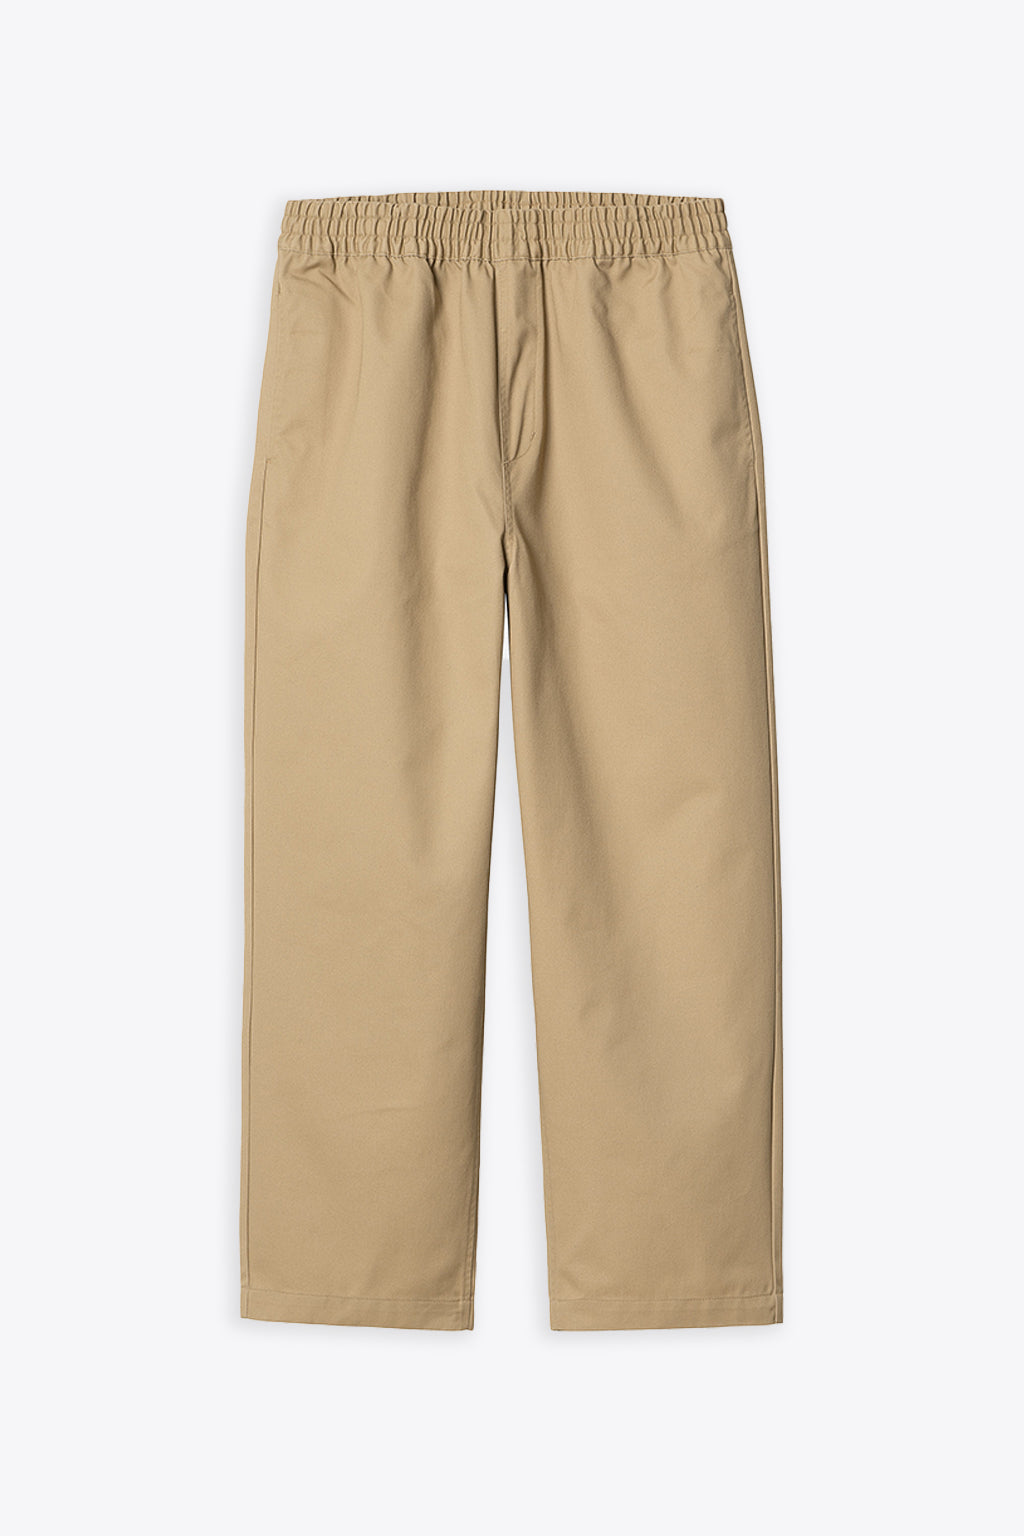 alt-image__Pantalone-in-twill-beige---Newhaven-pant